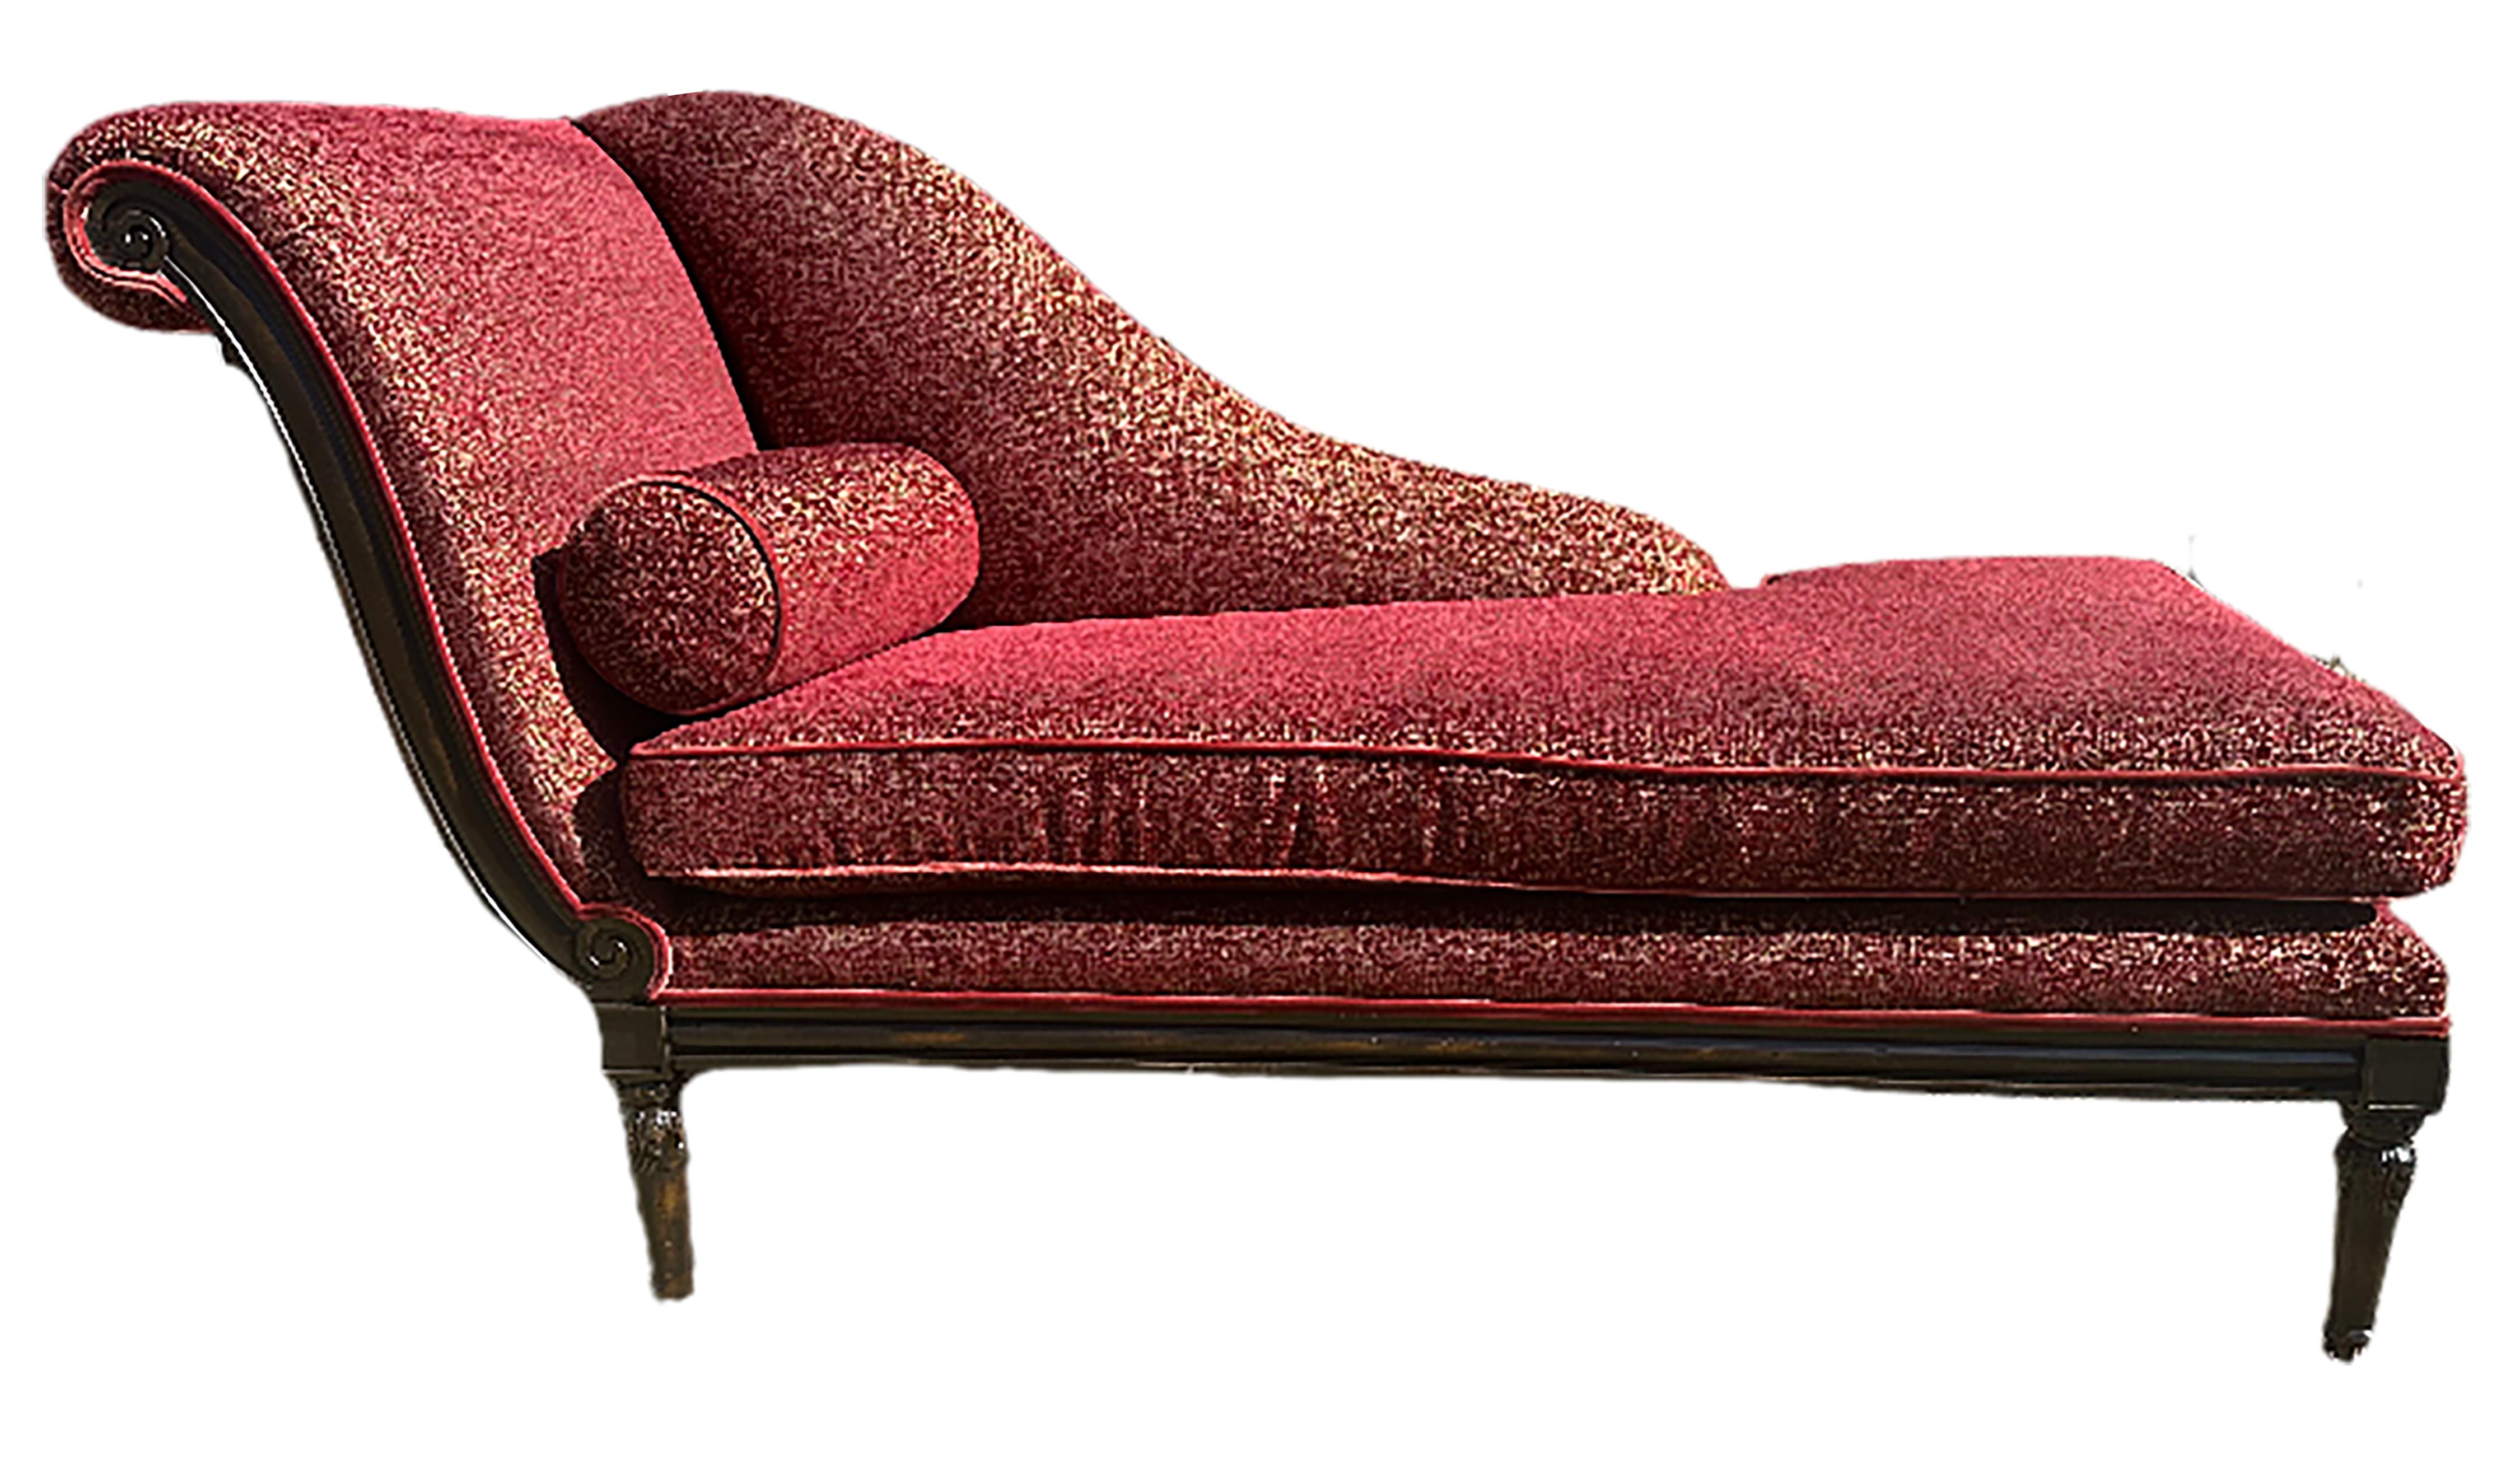 A fantastic, newly upholstered antique chaise longue worthy of Madame Le Recamier. deep reds. The back arches in a sophisticated semi-French curve shape. Includes a round bolster to enhance its comfort. 

In very good condition. Restored ebonized